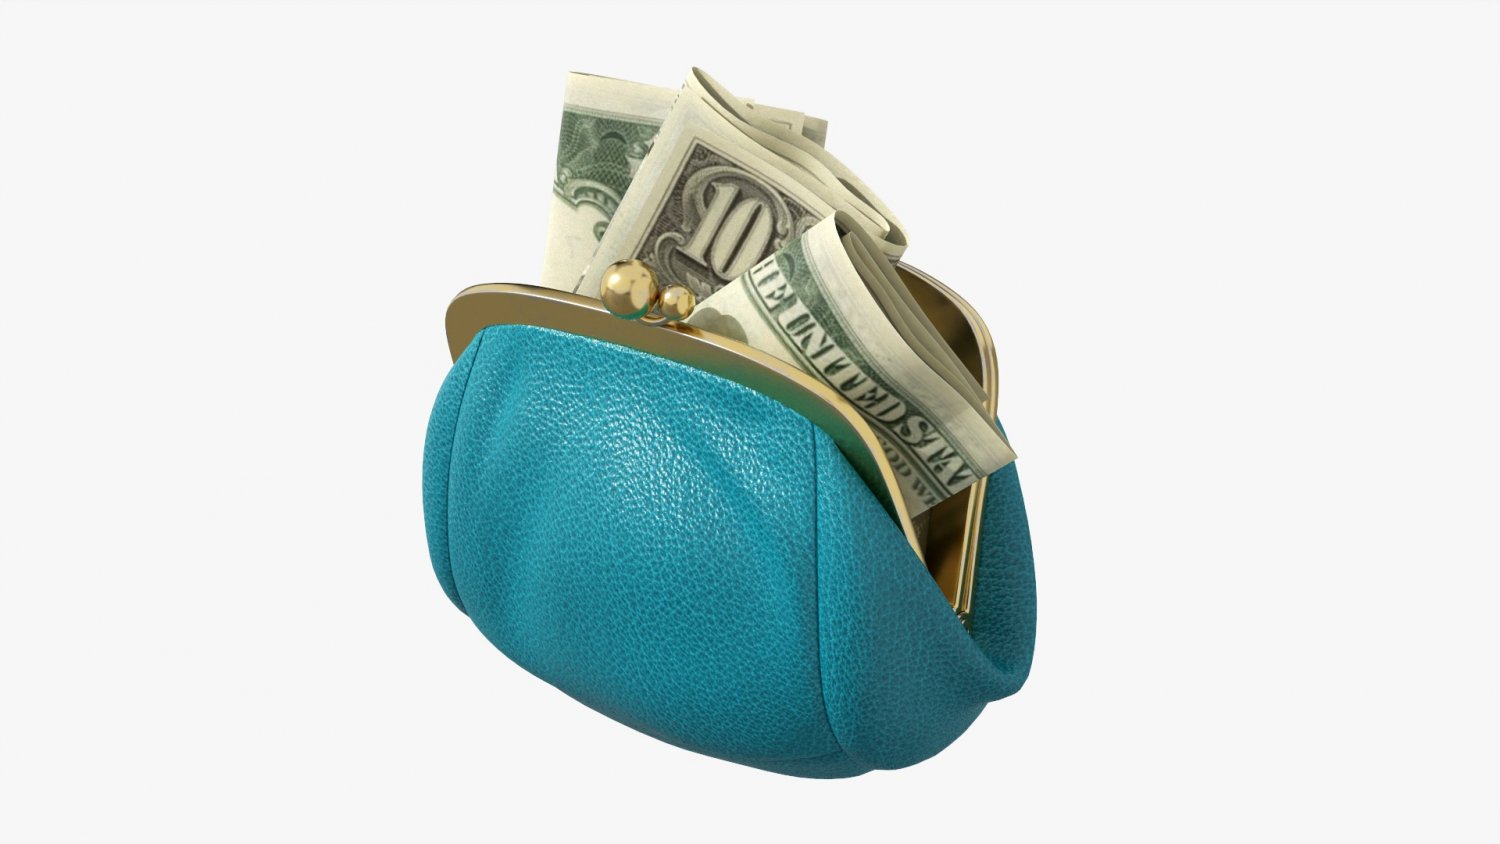 Image of Money Bag Or Gents Wallet Full Of 500 Rupees Cash.-ZK449548-Picxy